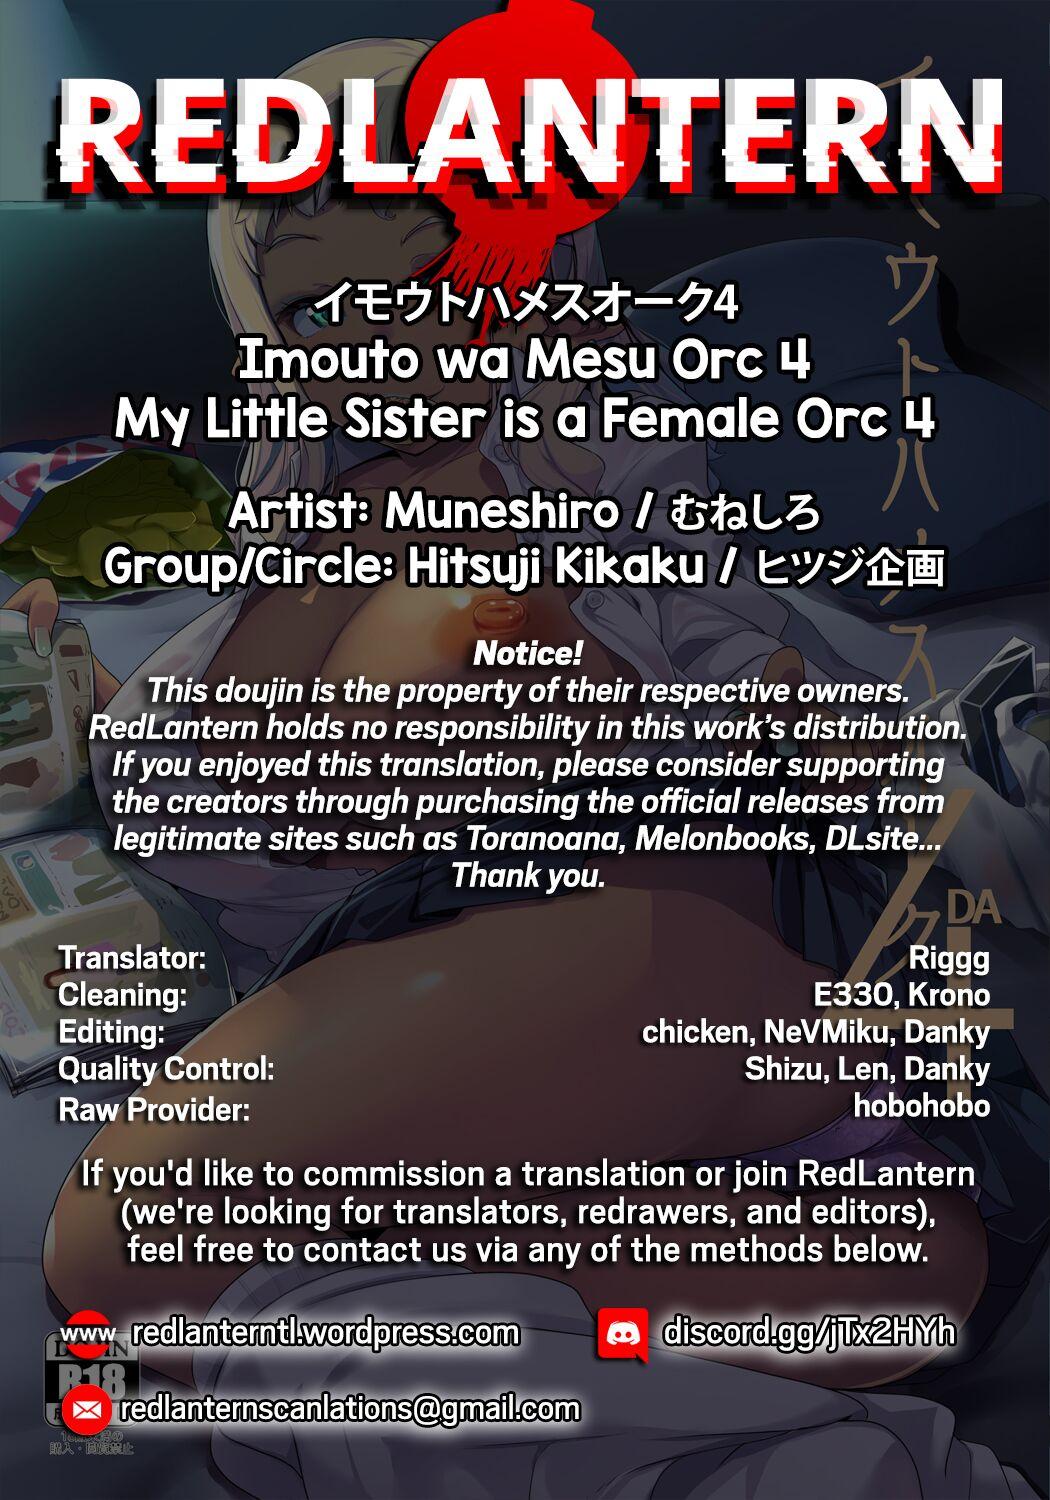 Imouto wa Mesu Orc 4 | My Little Sister is a Female Orc 4 29